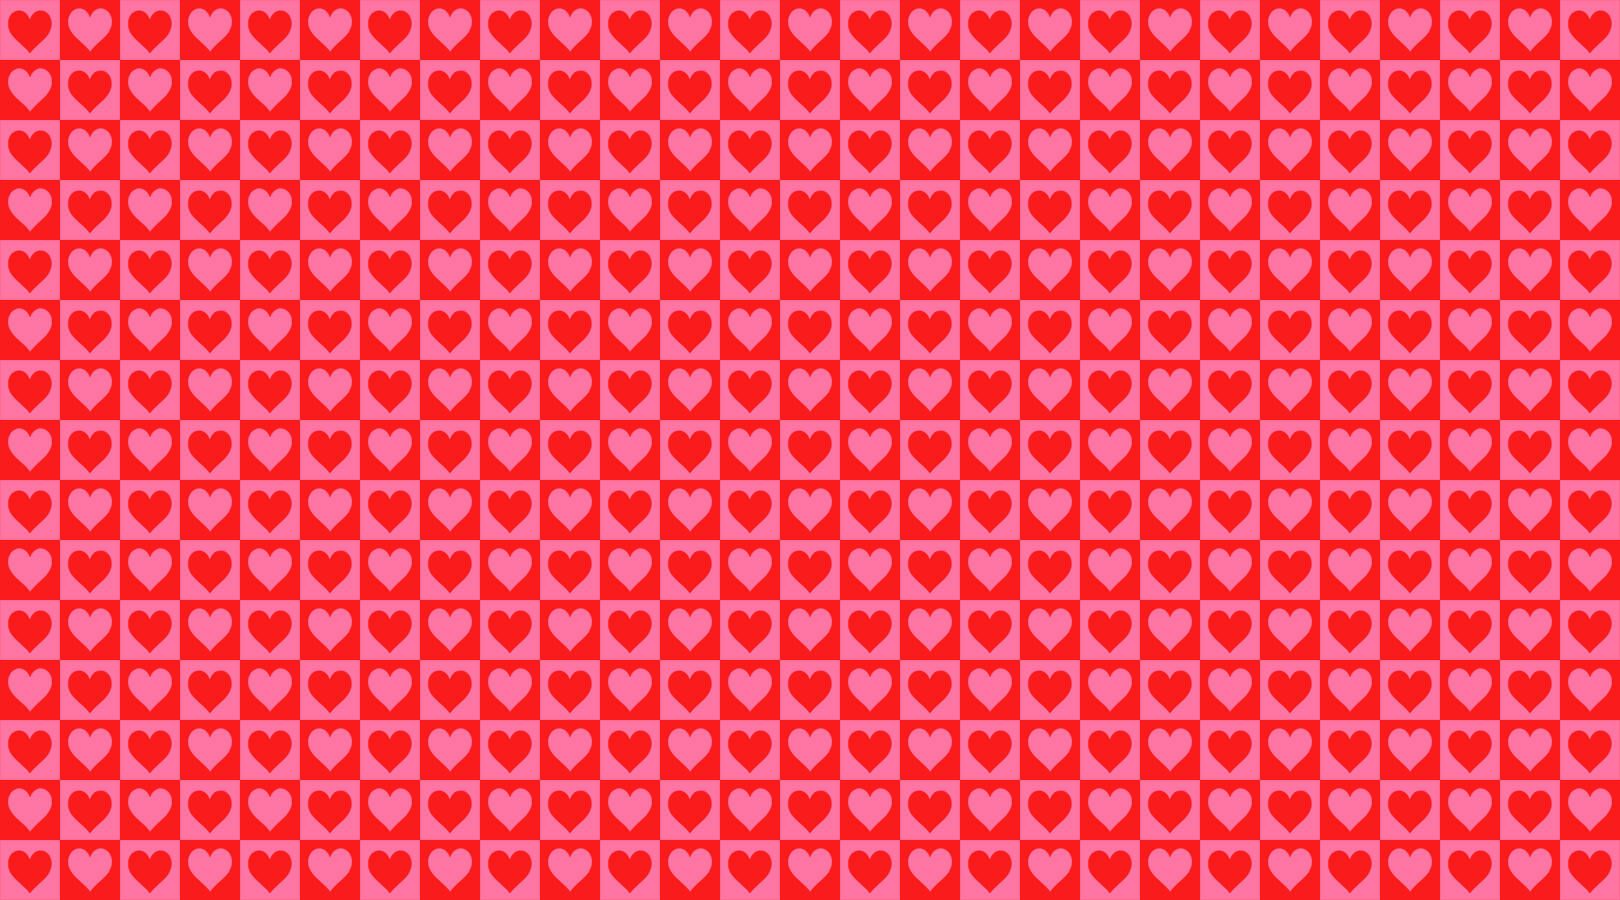 A red background with hearts - Valentine's Day